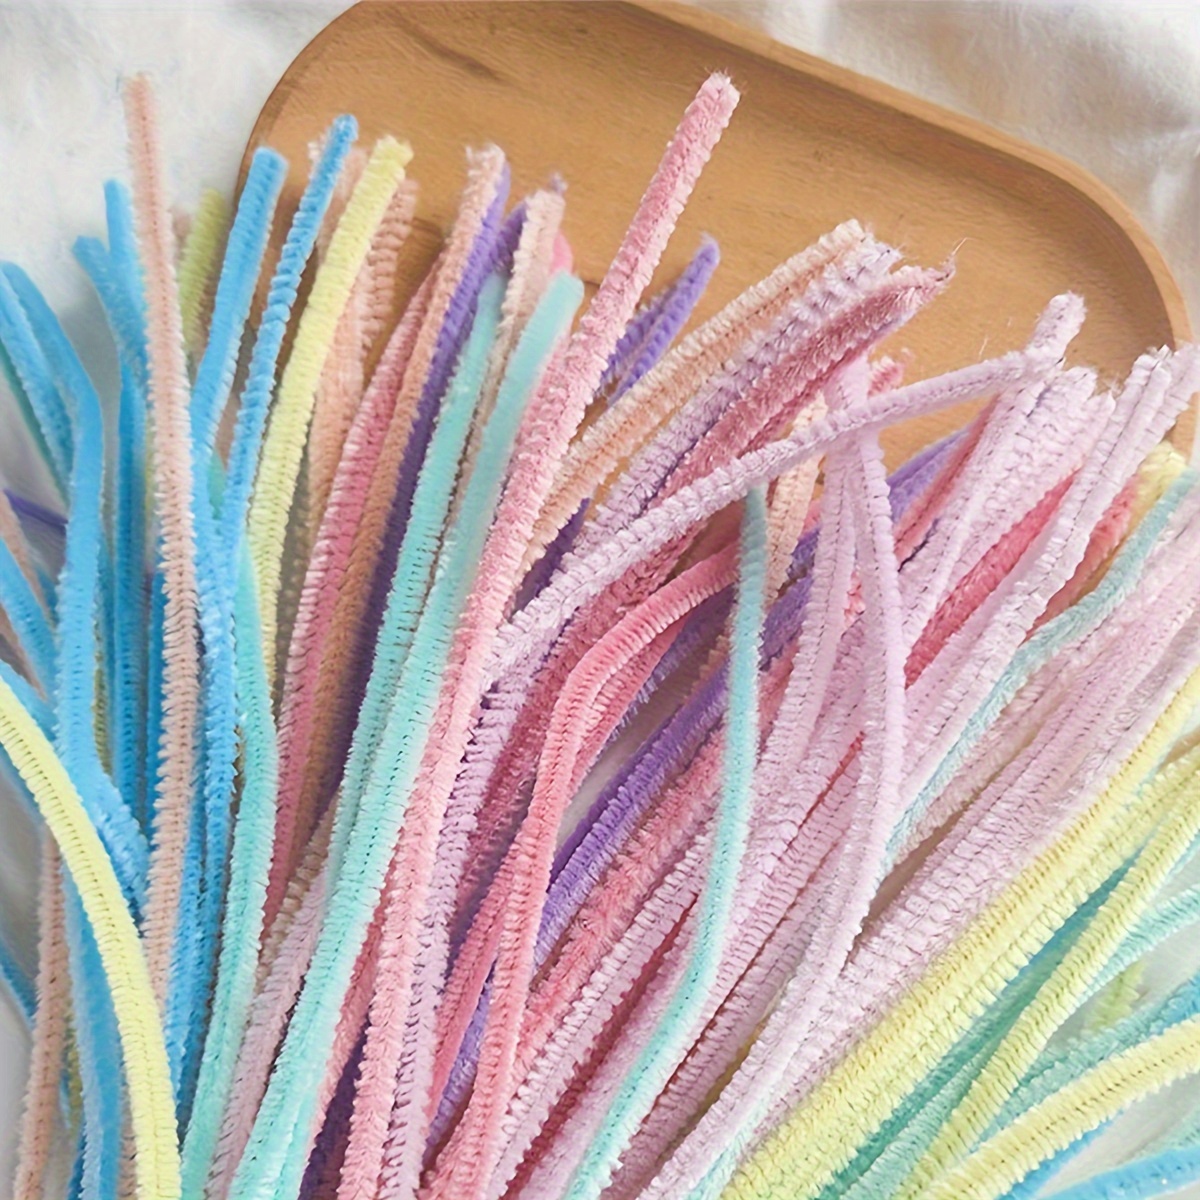 

100pcs Fabric Velvet Mixed Color Twist Sticks, Chenille Stems Colorful Strips, Creative Handmade Diy Craft Accessories